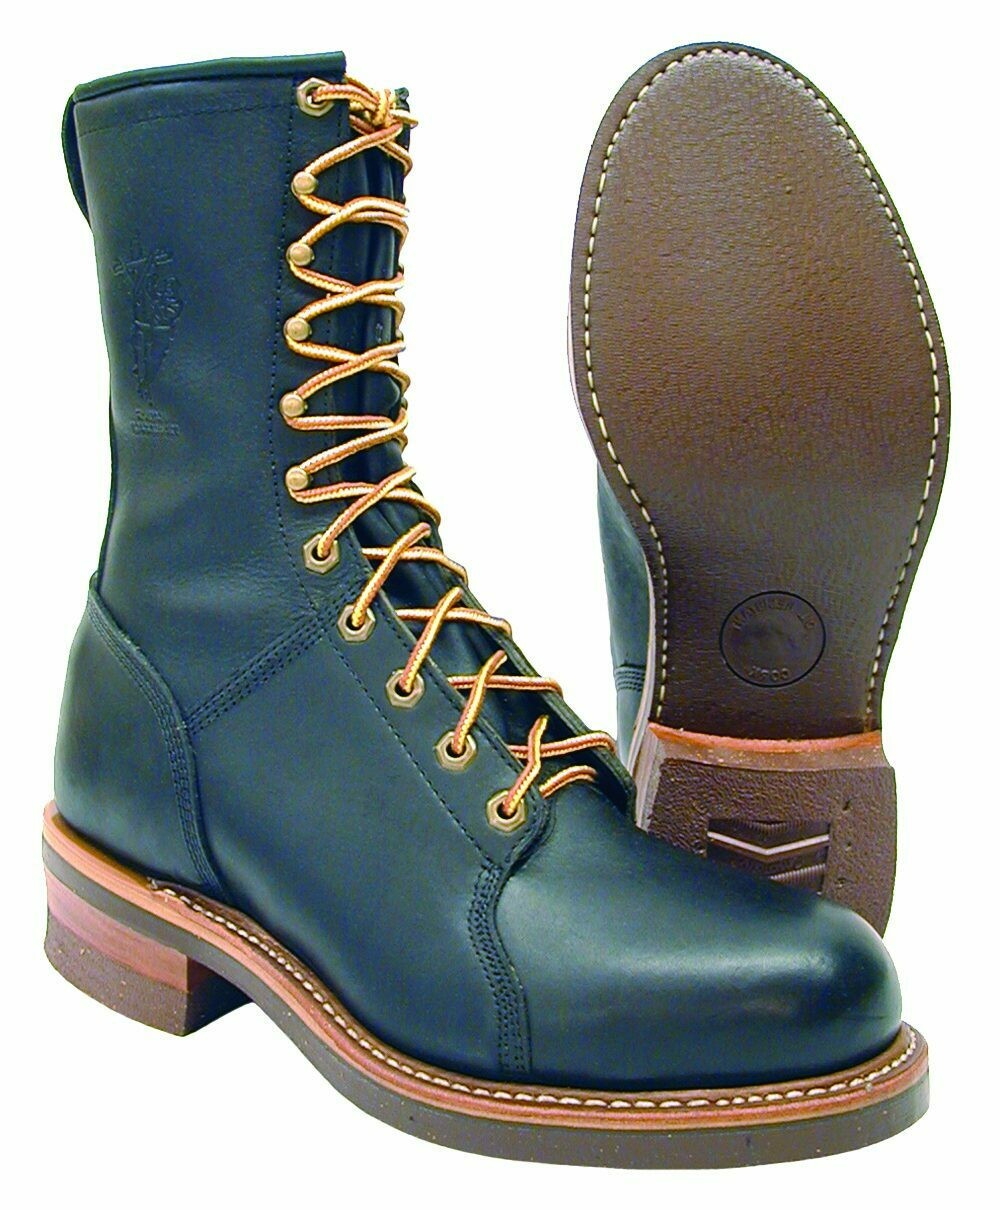 Hall's 605 10 Black Steel Toe EH Smooth Sole Lineman Boots